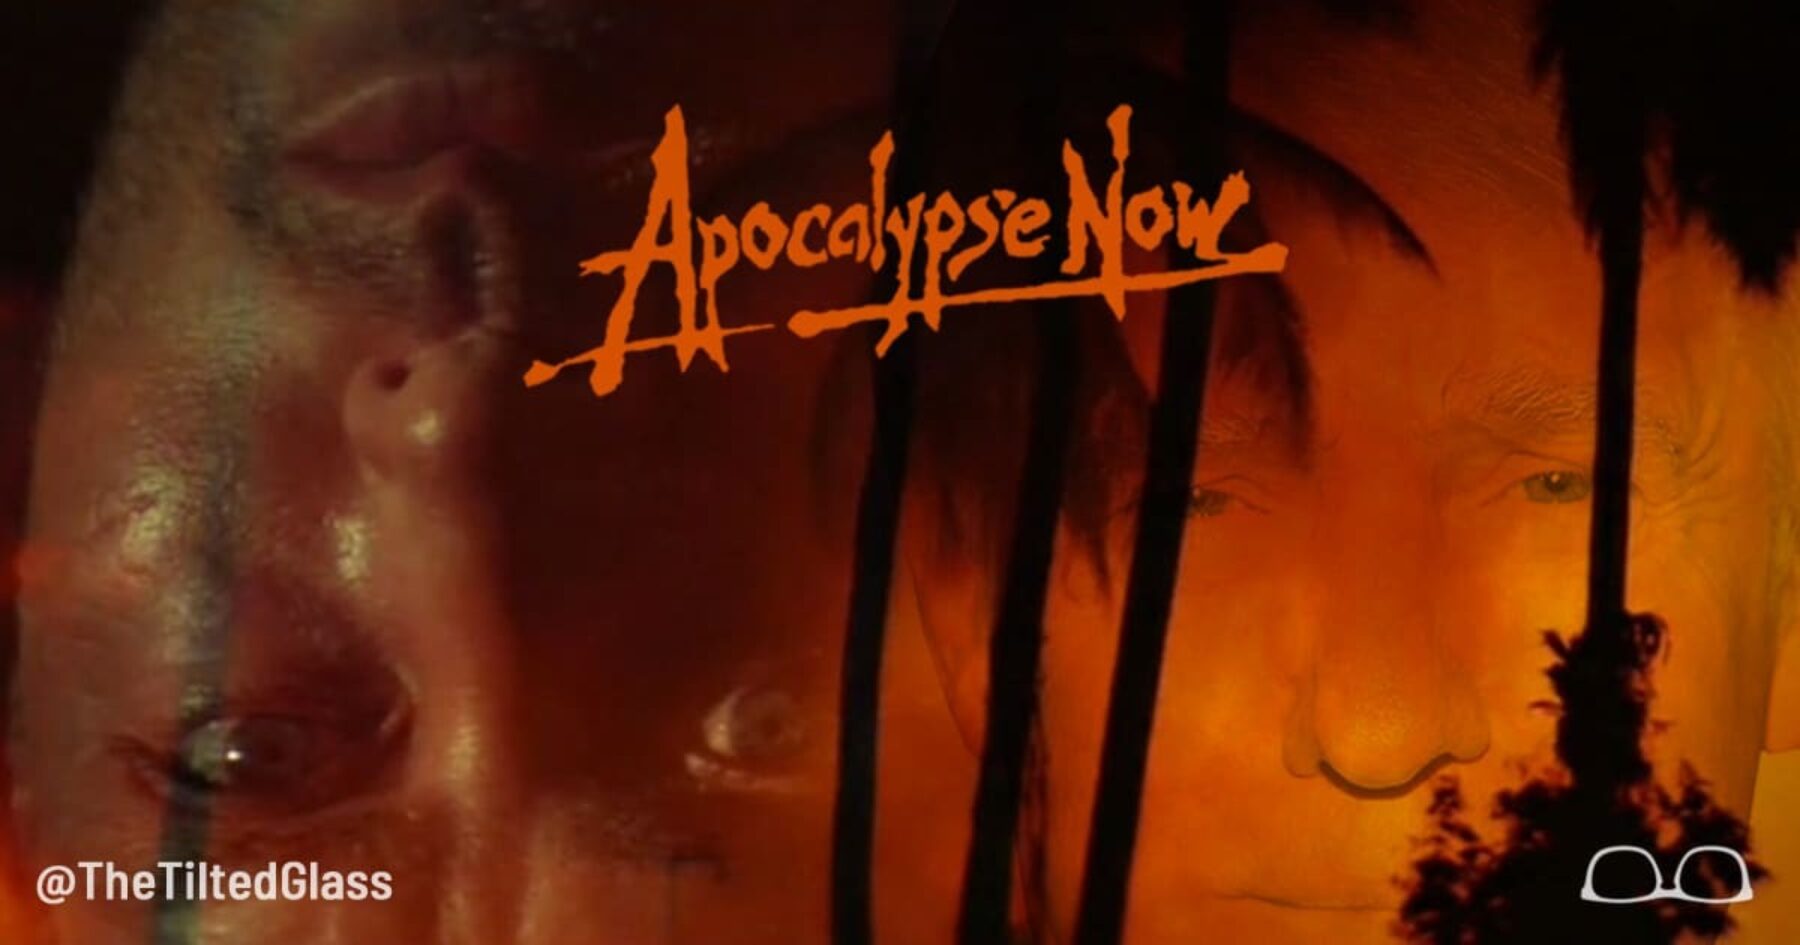 Trump to Star in One-Man Remake of Apocalypse Now